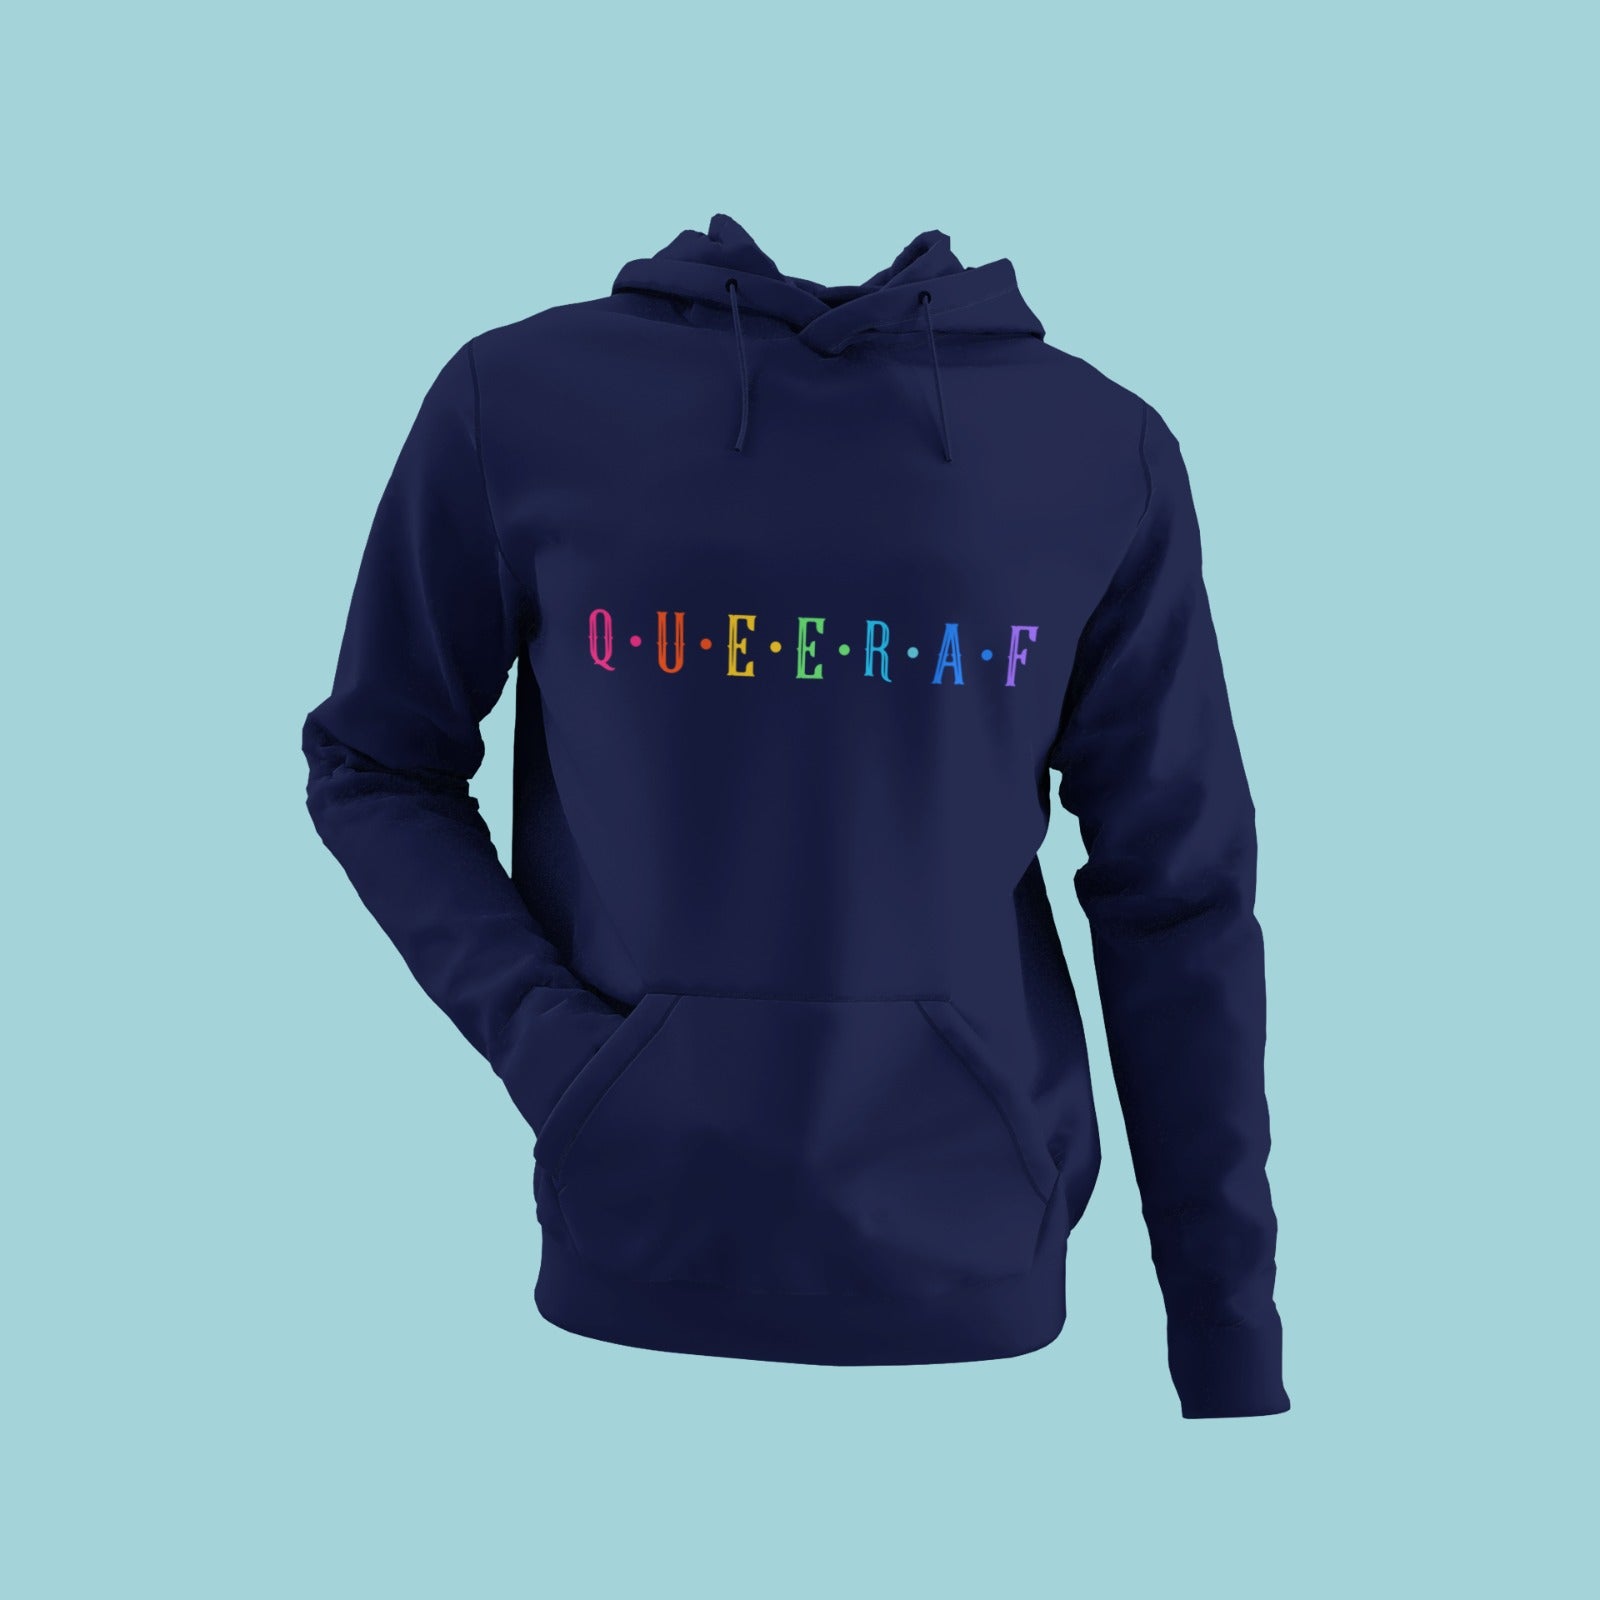 Get ready to show off your pride with our navy blue hoodie featuring Q.U.E.E.R.A.F in rainbow-coloured letters. This bold design will make a statement wherever you go. Stay cozy and confident while letting everyone know you're proud to be queer AF.